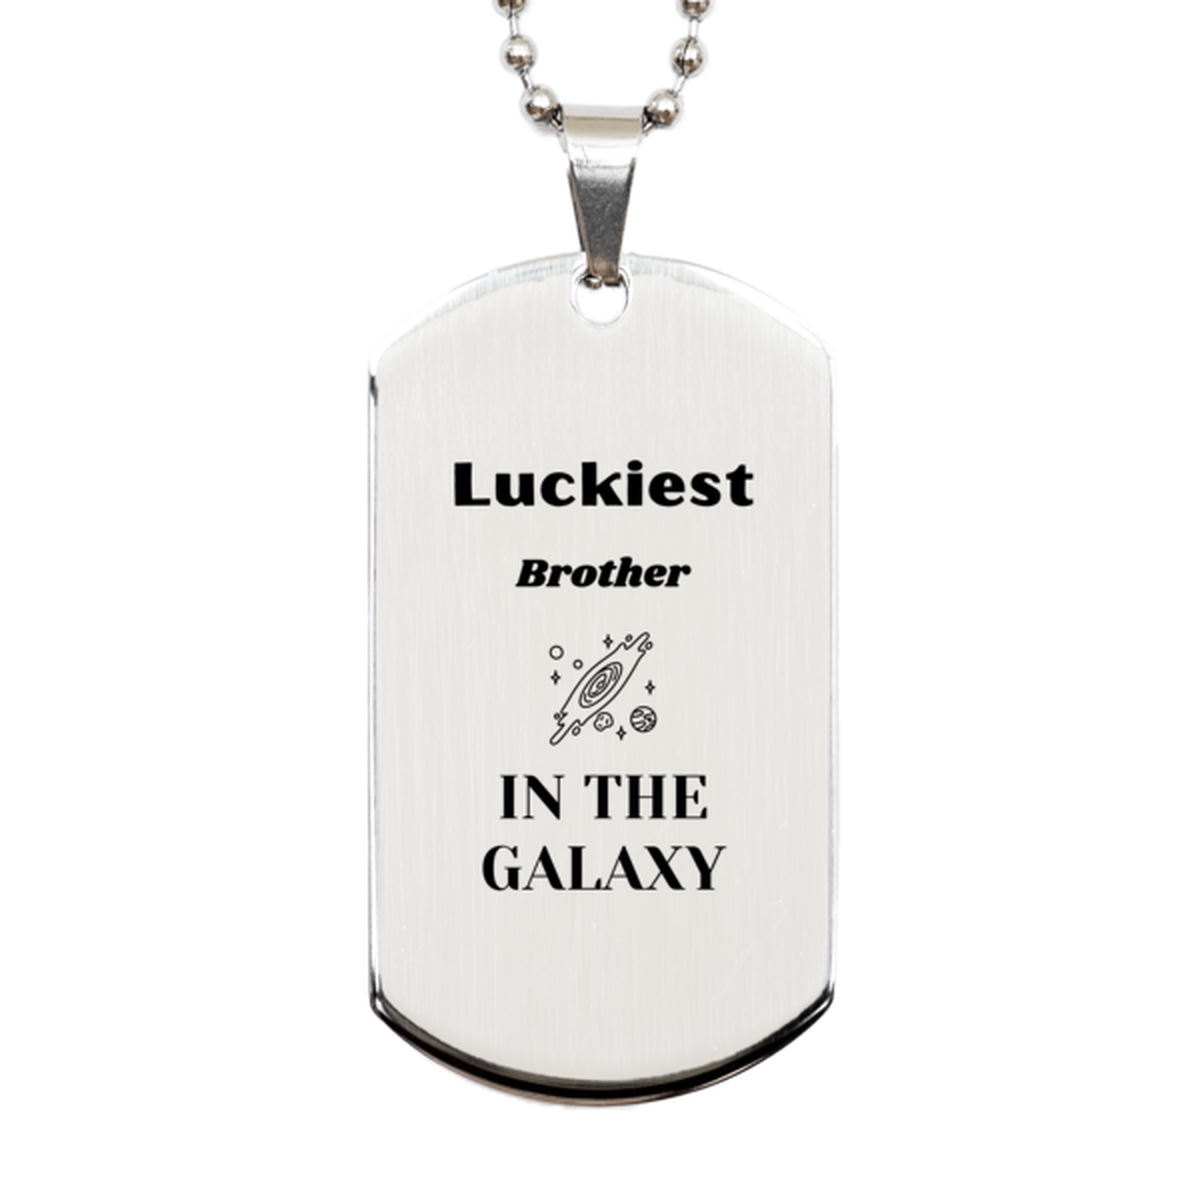 Luckiest Brother in the Galaxy, To My Brother Engraved Gifts, Christmas Brother Silver Dog Tag Gifts, X-mas Birthday Unique Gifts For Brother Men Women